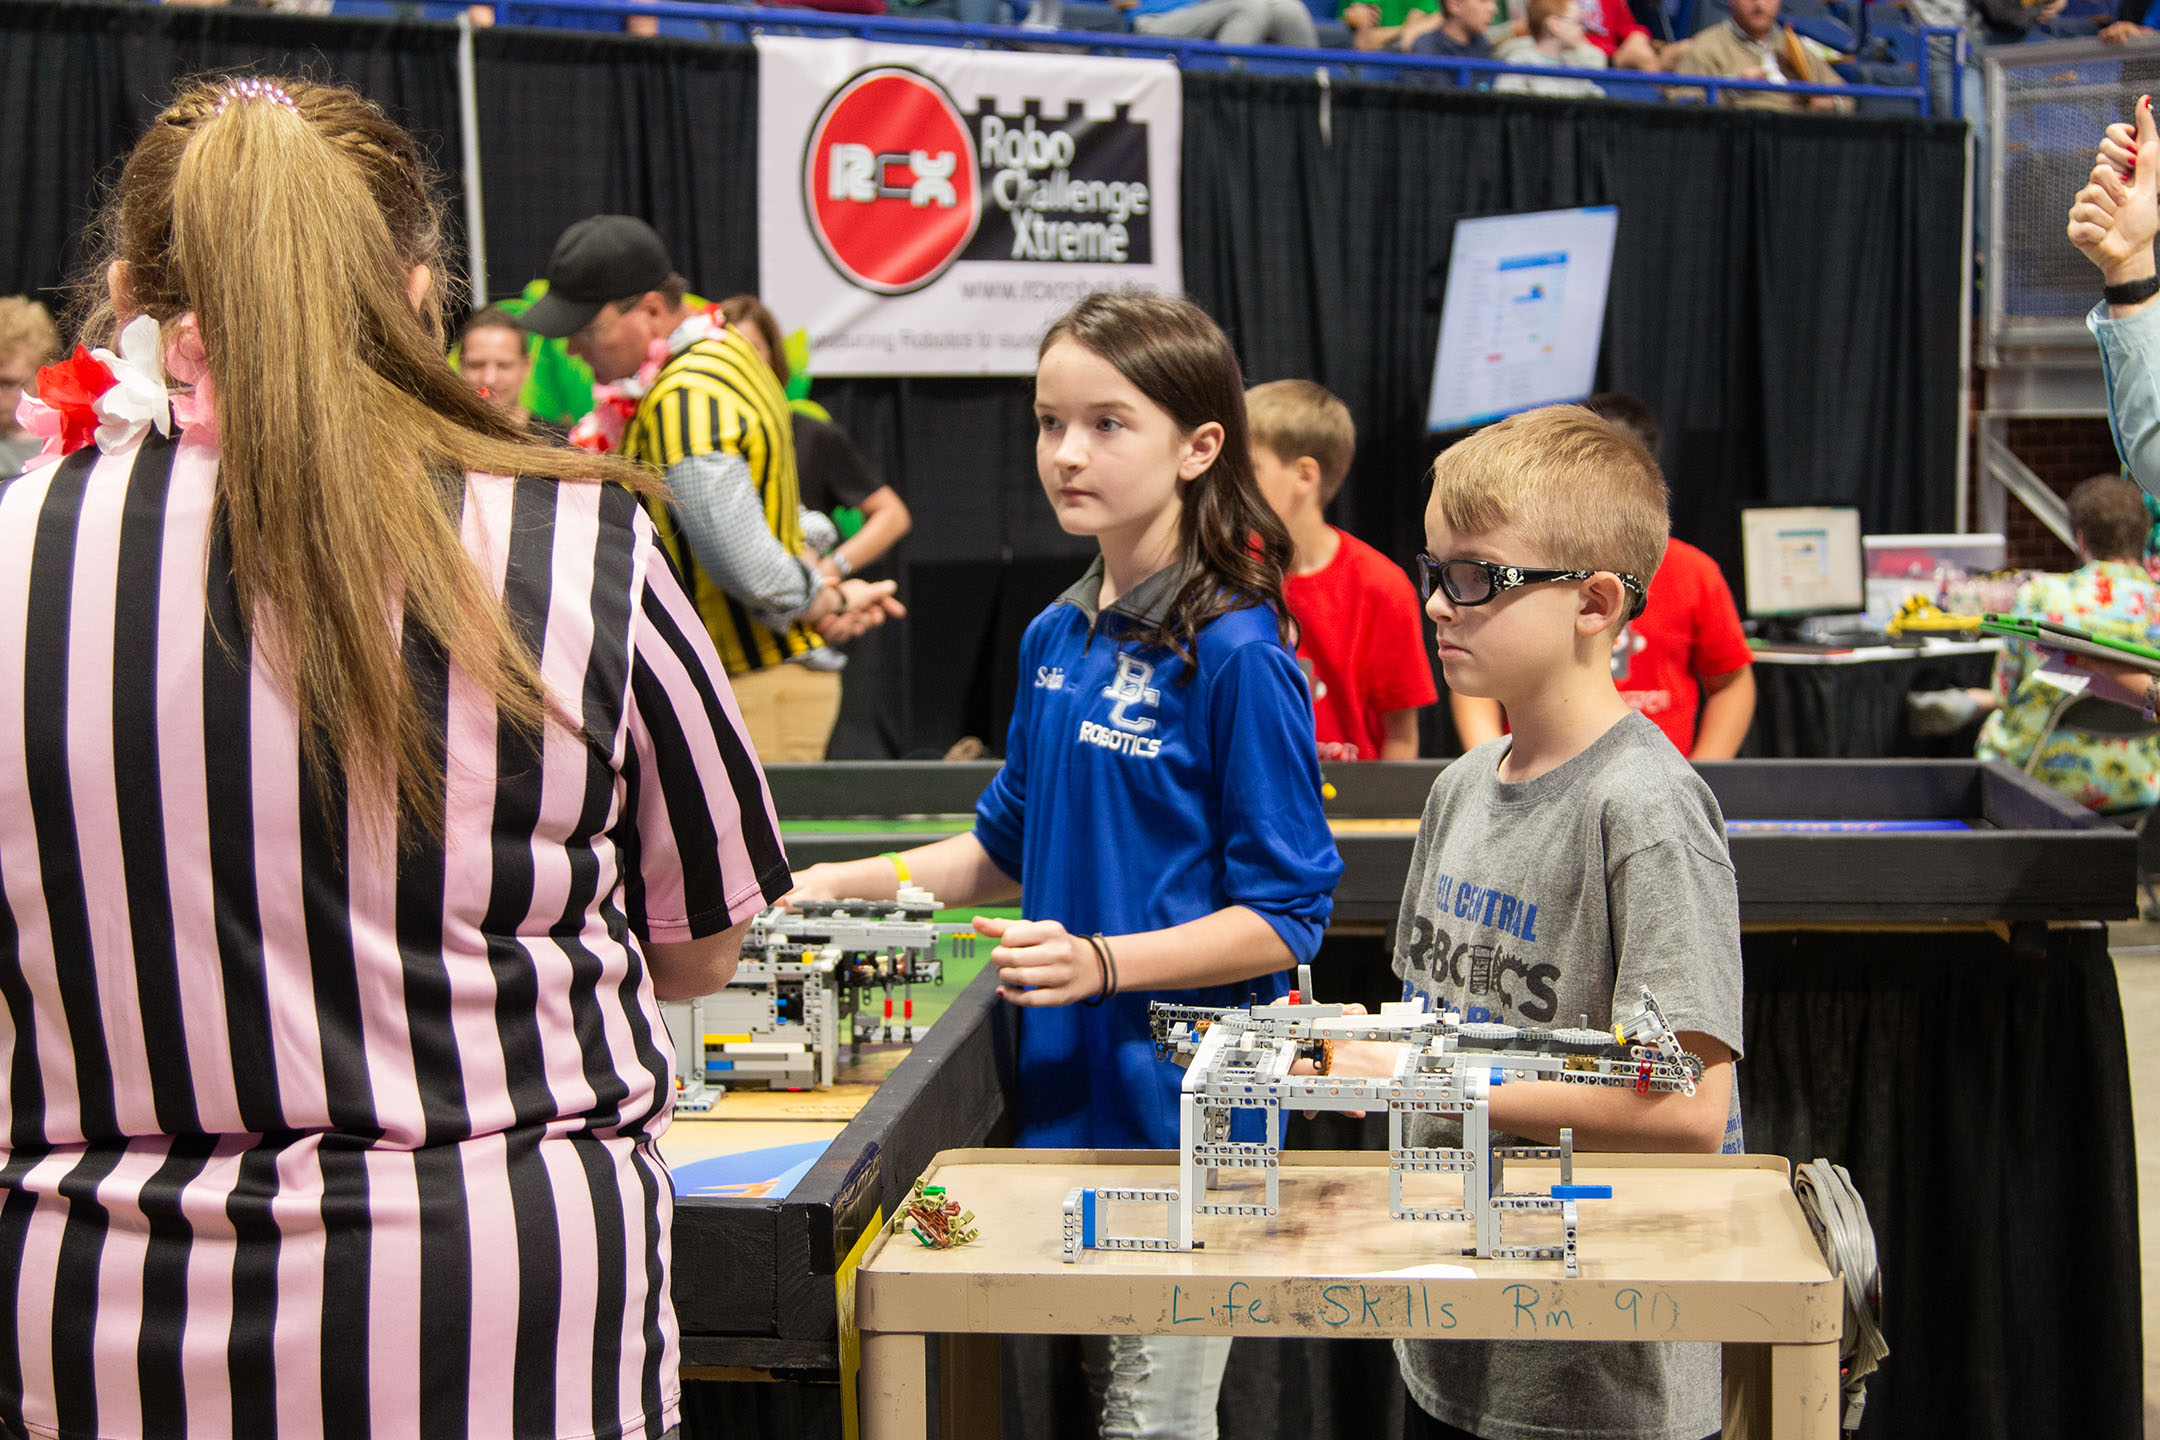 Bell Central School Center (Bell County) students Sophia Goode and Eli Knuckles compete in the Robo Challenge Xtreme competition at the STLP State Championship.